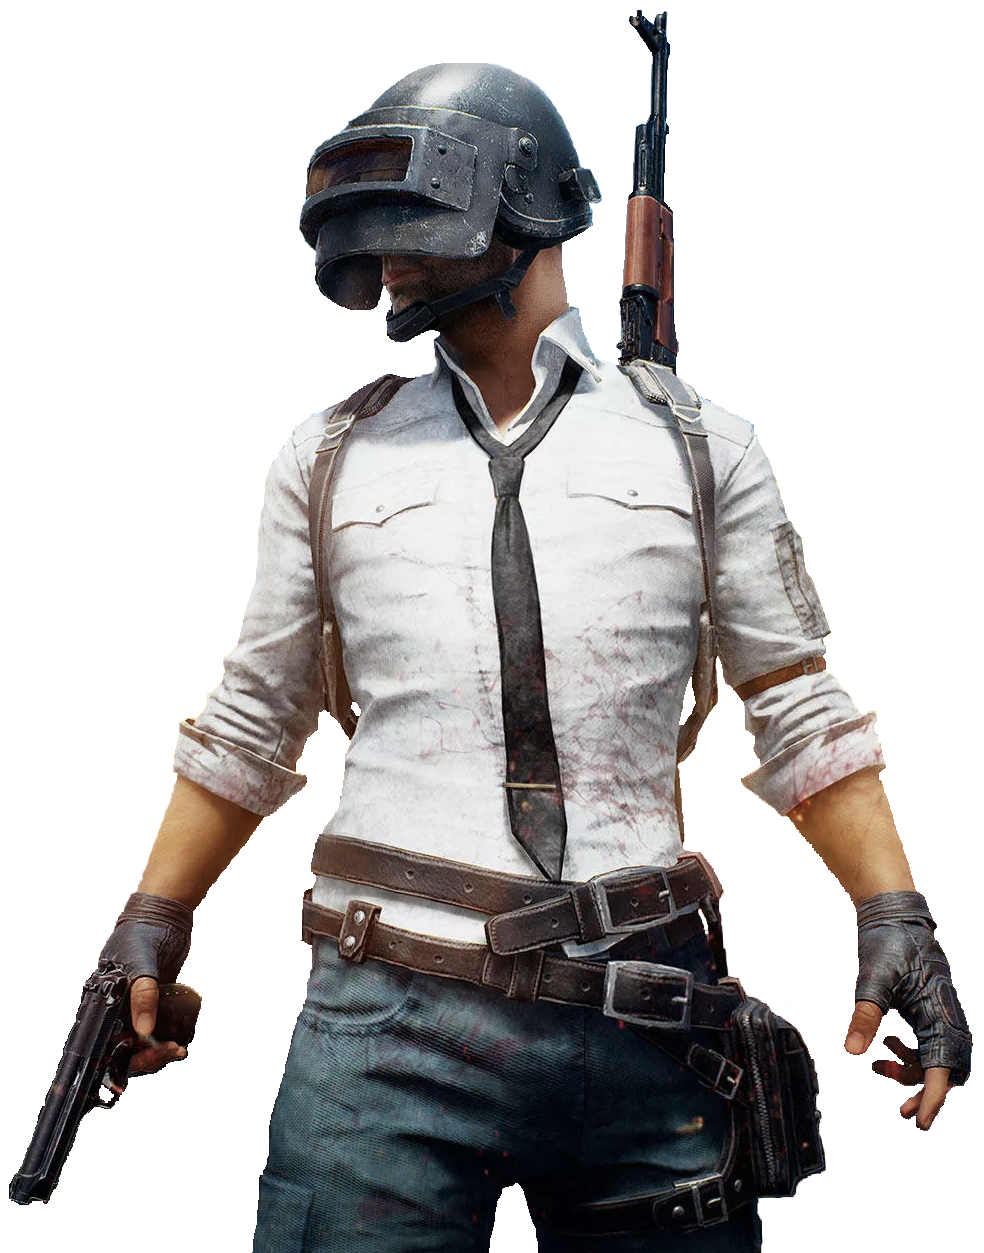 Deduction White Transparent, Gun Eating Chicken Game Free Deduction, No  Deduction, Firearms, Pubg PNG Image For Free Download